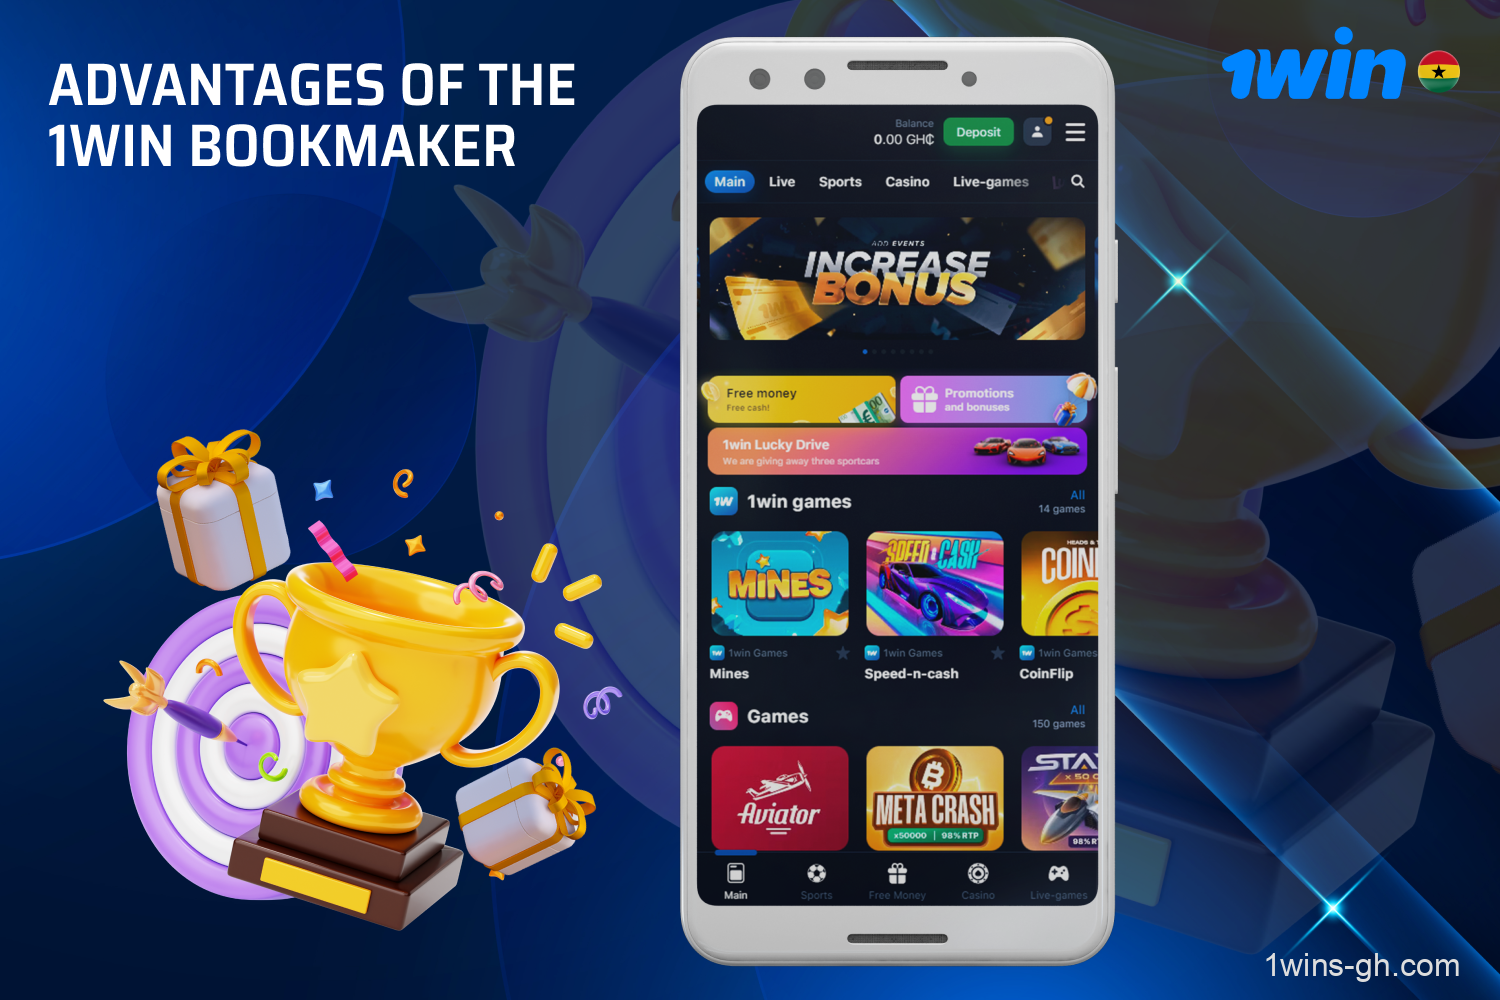 The 1win bookmaker is popular among players from Ghana, largely due to a number of advantages that both the website and mobile app possess